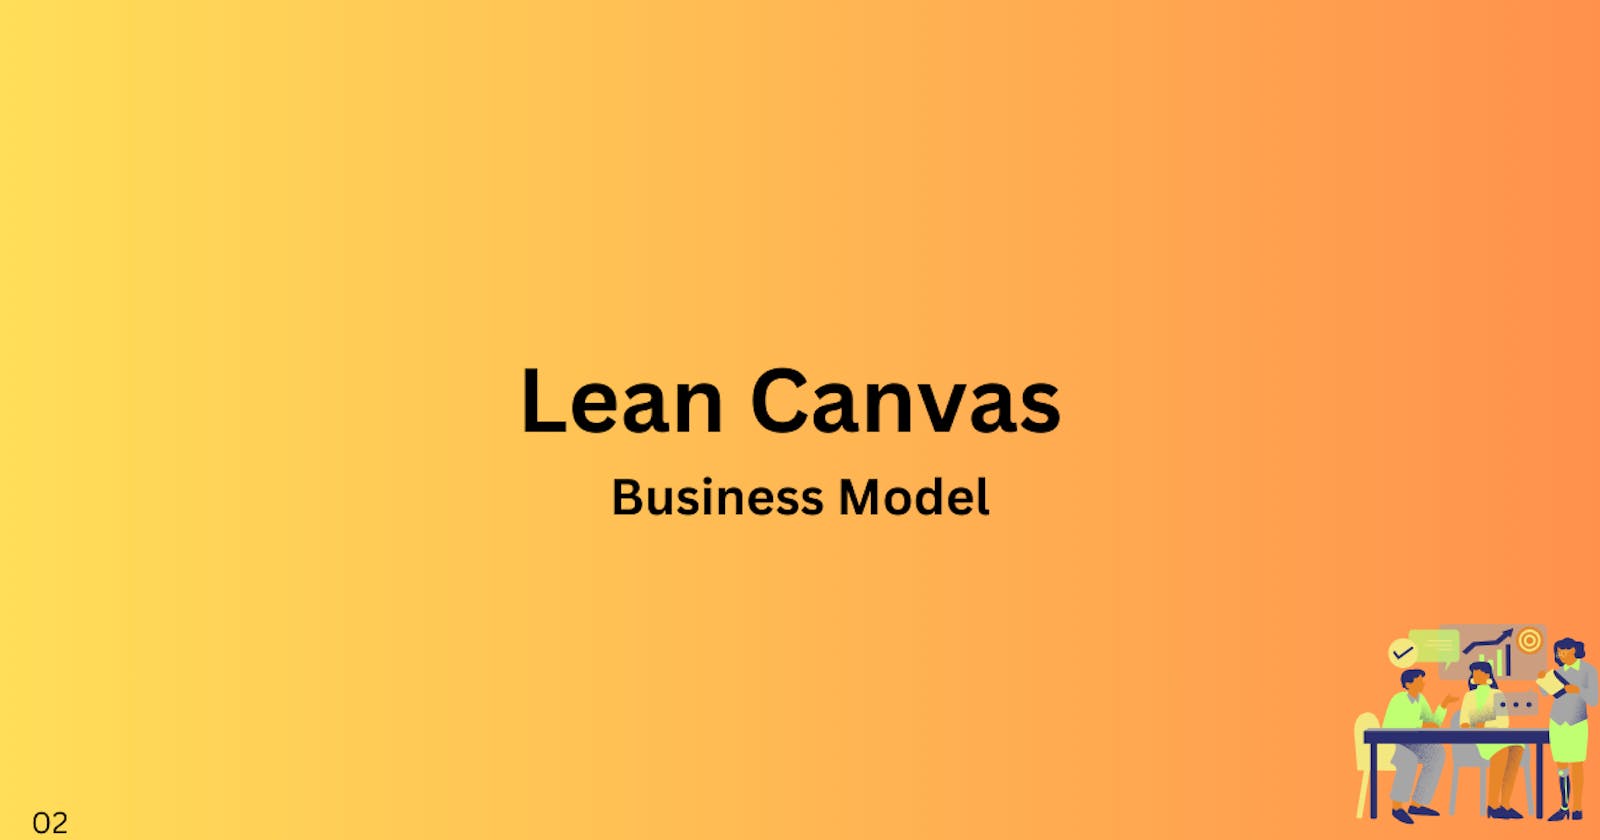 From Idea to Business Model: The Lean Canvas Approach